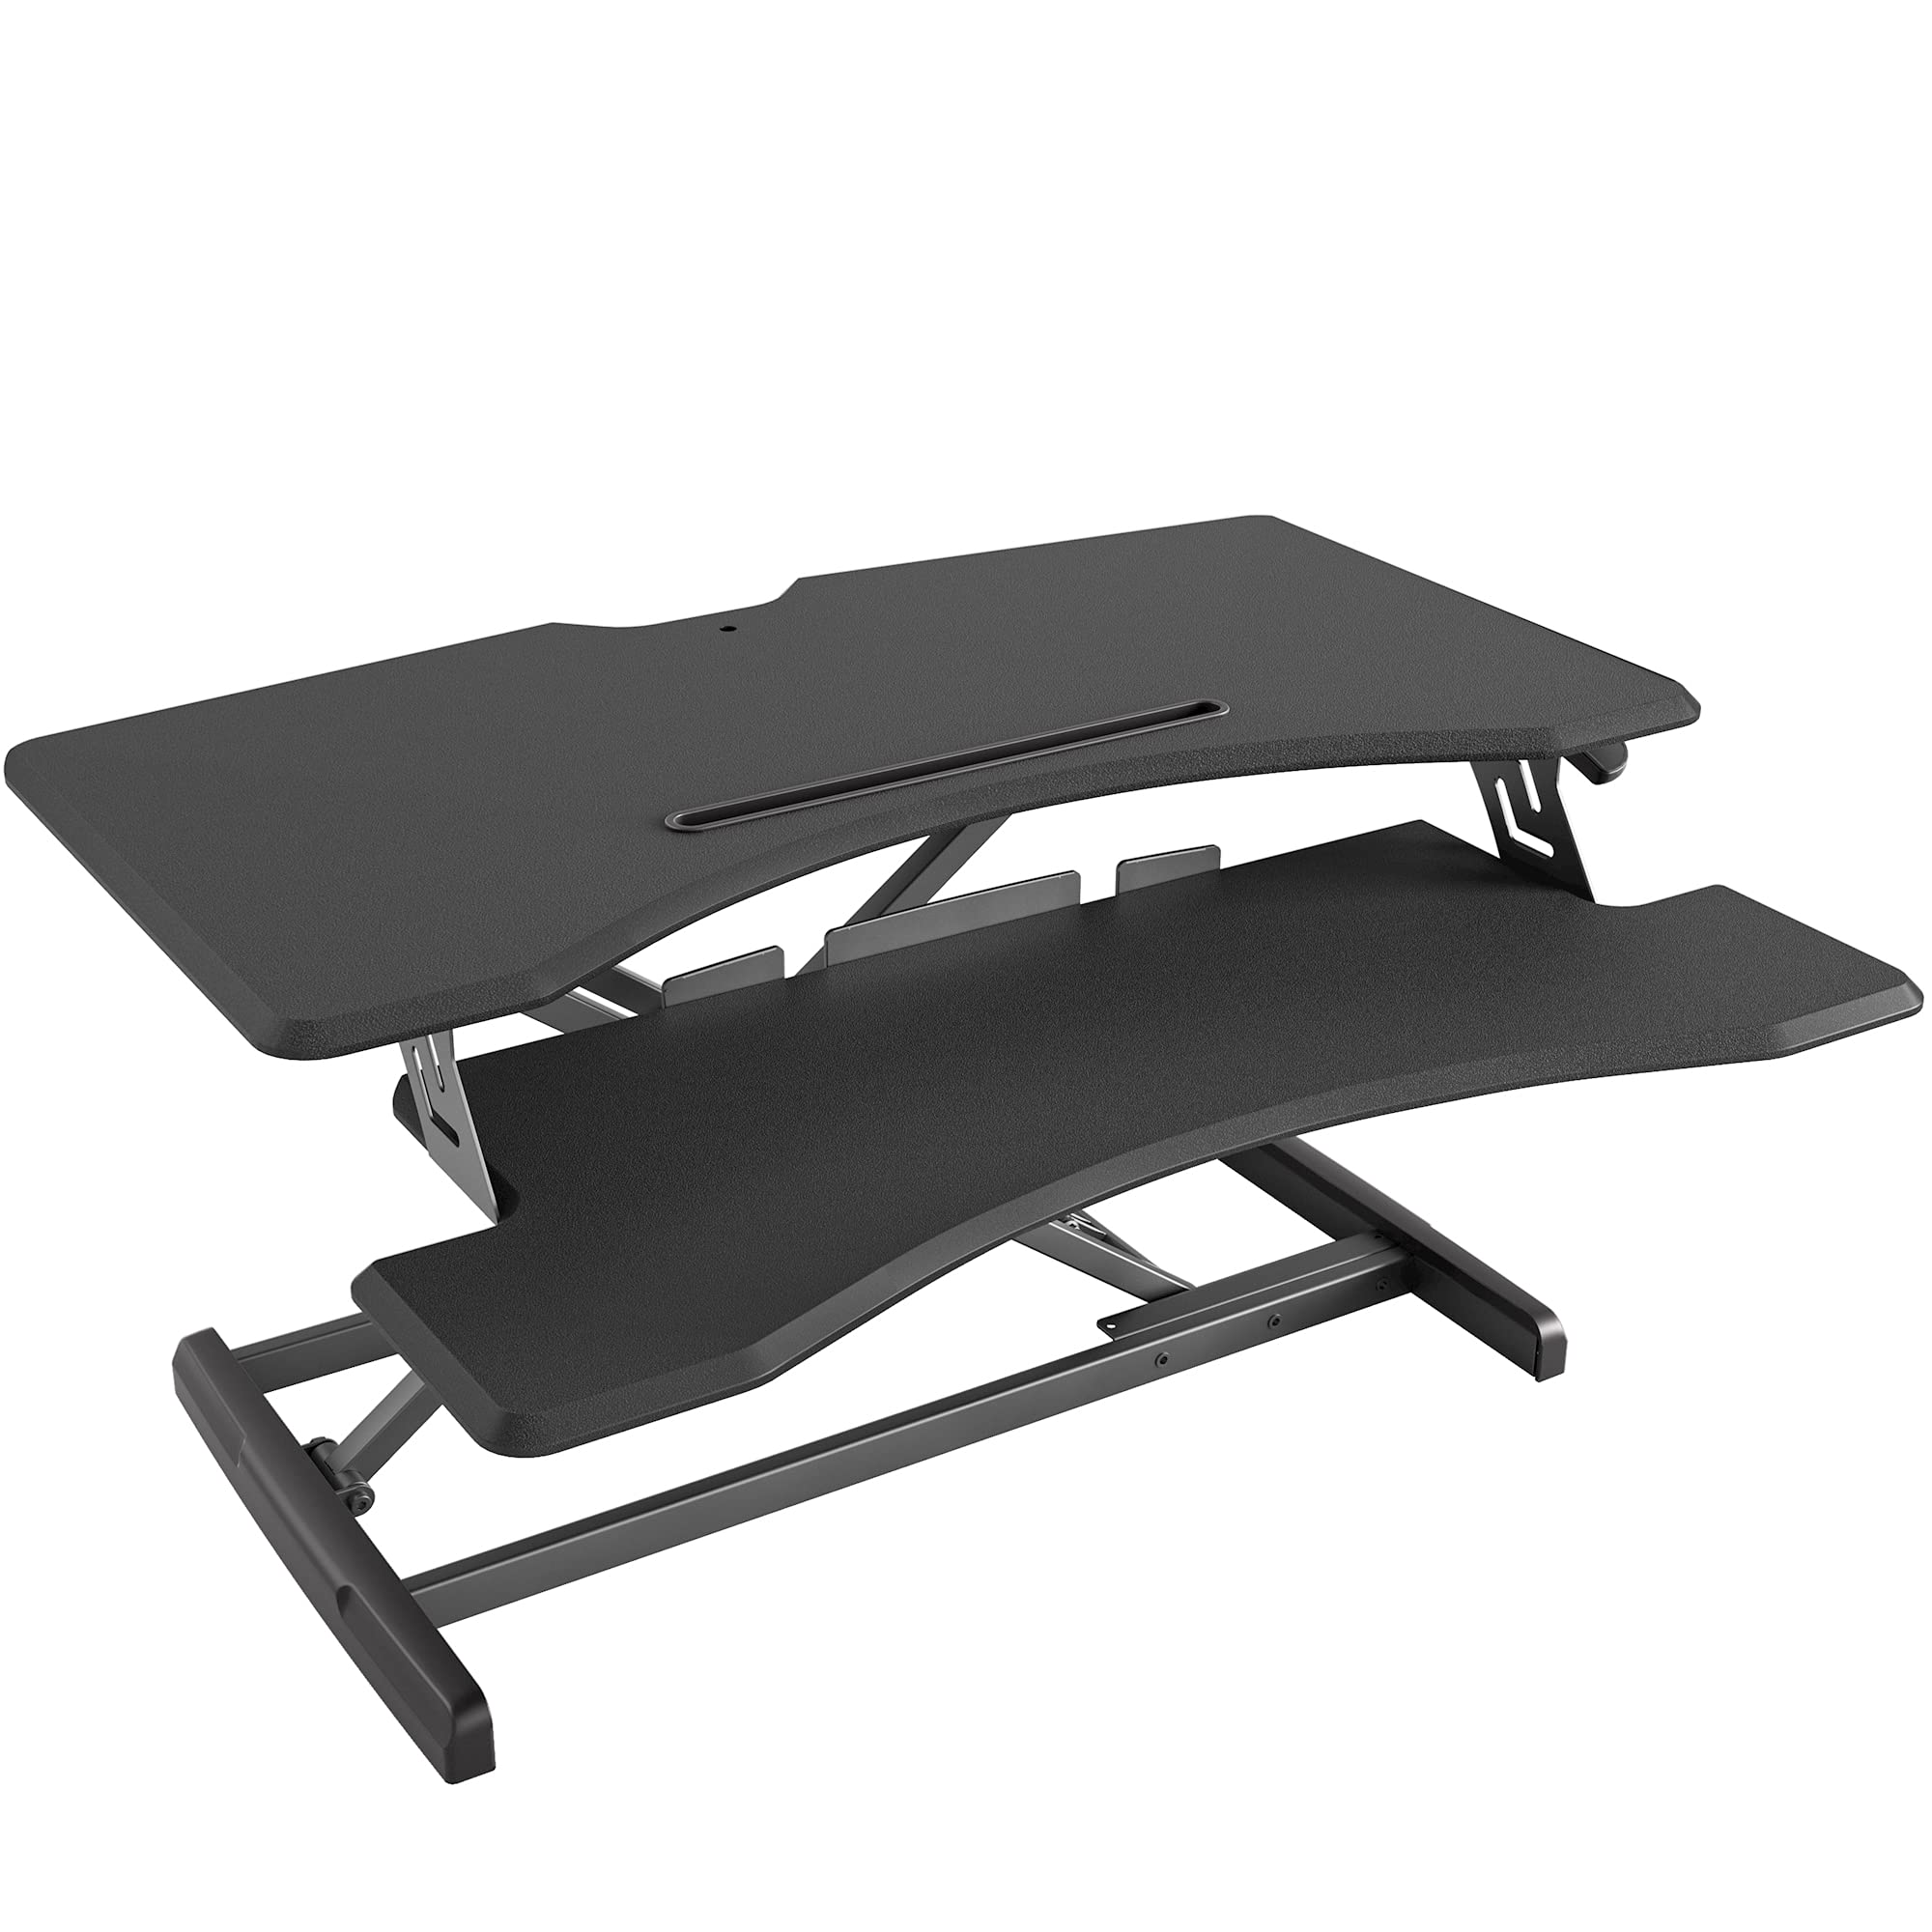 FEZIBO Height Adjustable, Desk Converter Stand up Riser Tabletop Workstation fits Dual Monitor 37 inches Black